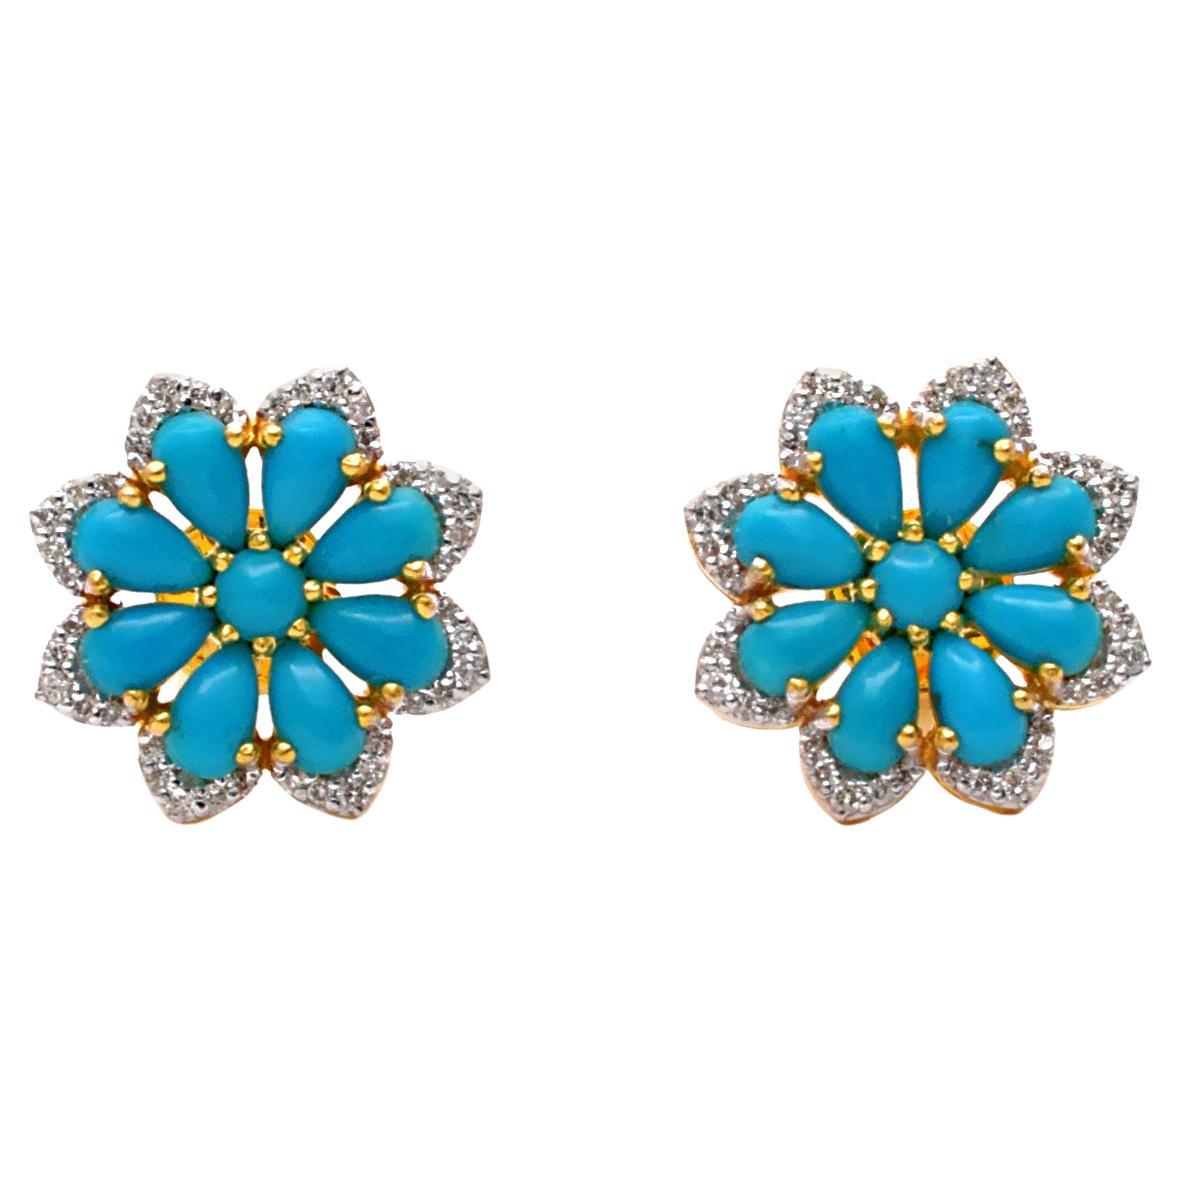 These earrings are made with turquoise gemstones and diamond pave. They are set in 14K gold. Shine all day long in this delicate pair of stud earrings. Perfect for gifting, they twinkle with timeless elegance. Easy to mix and match with other